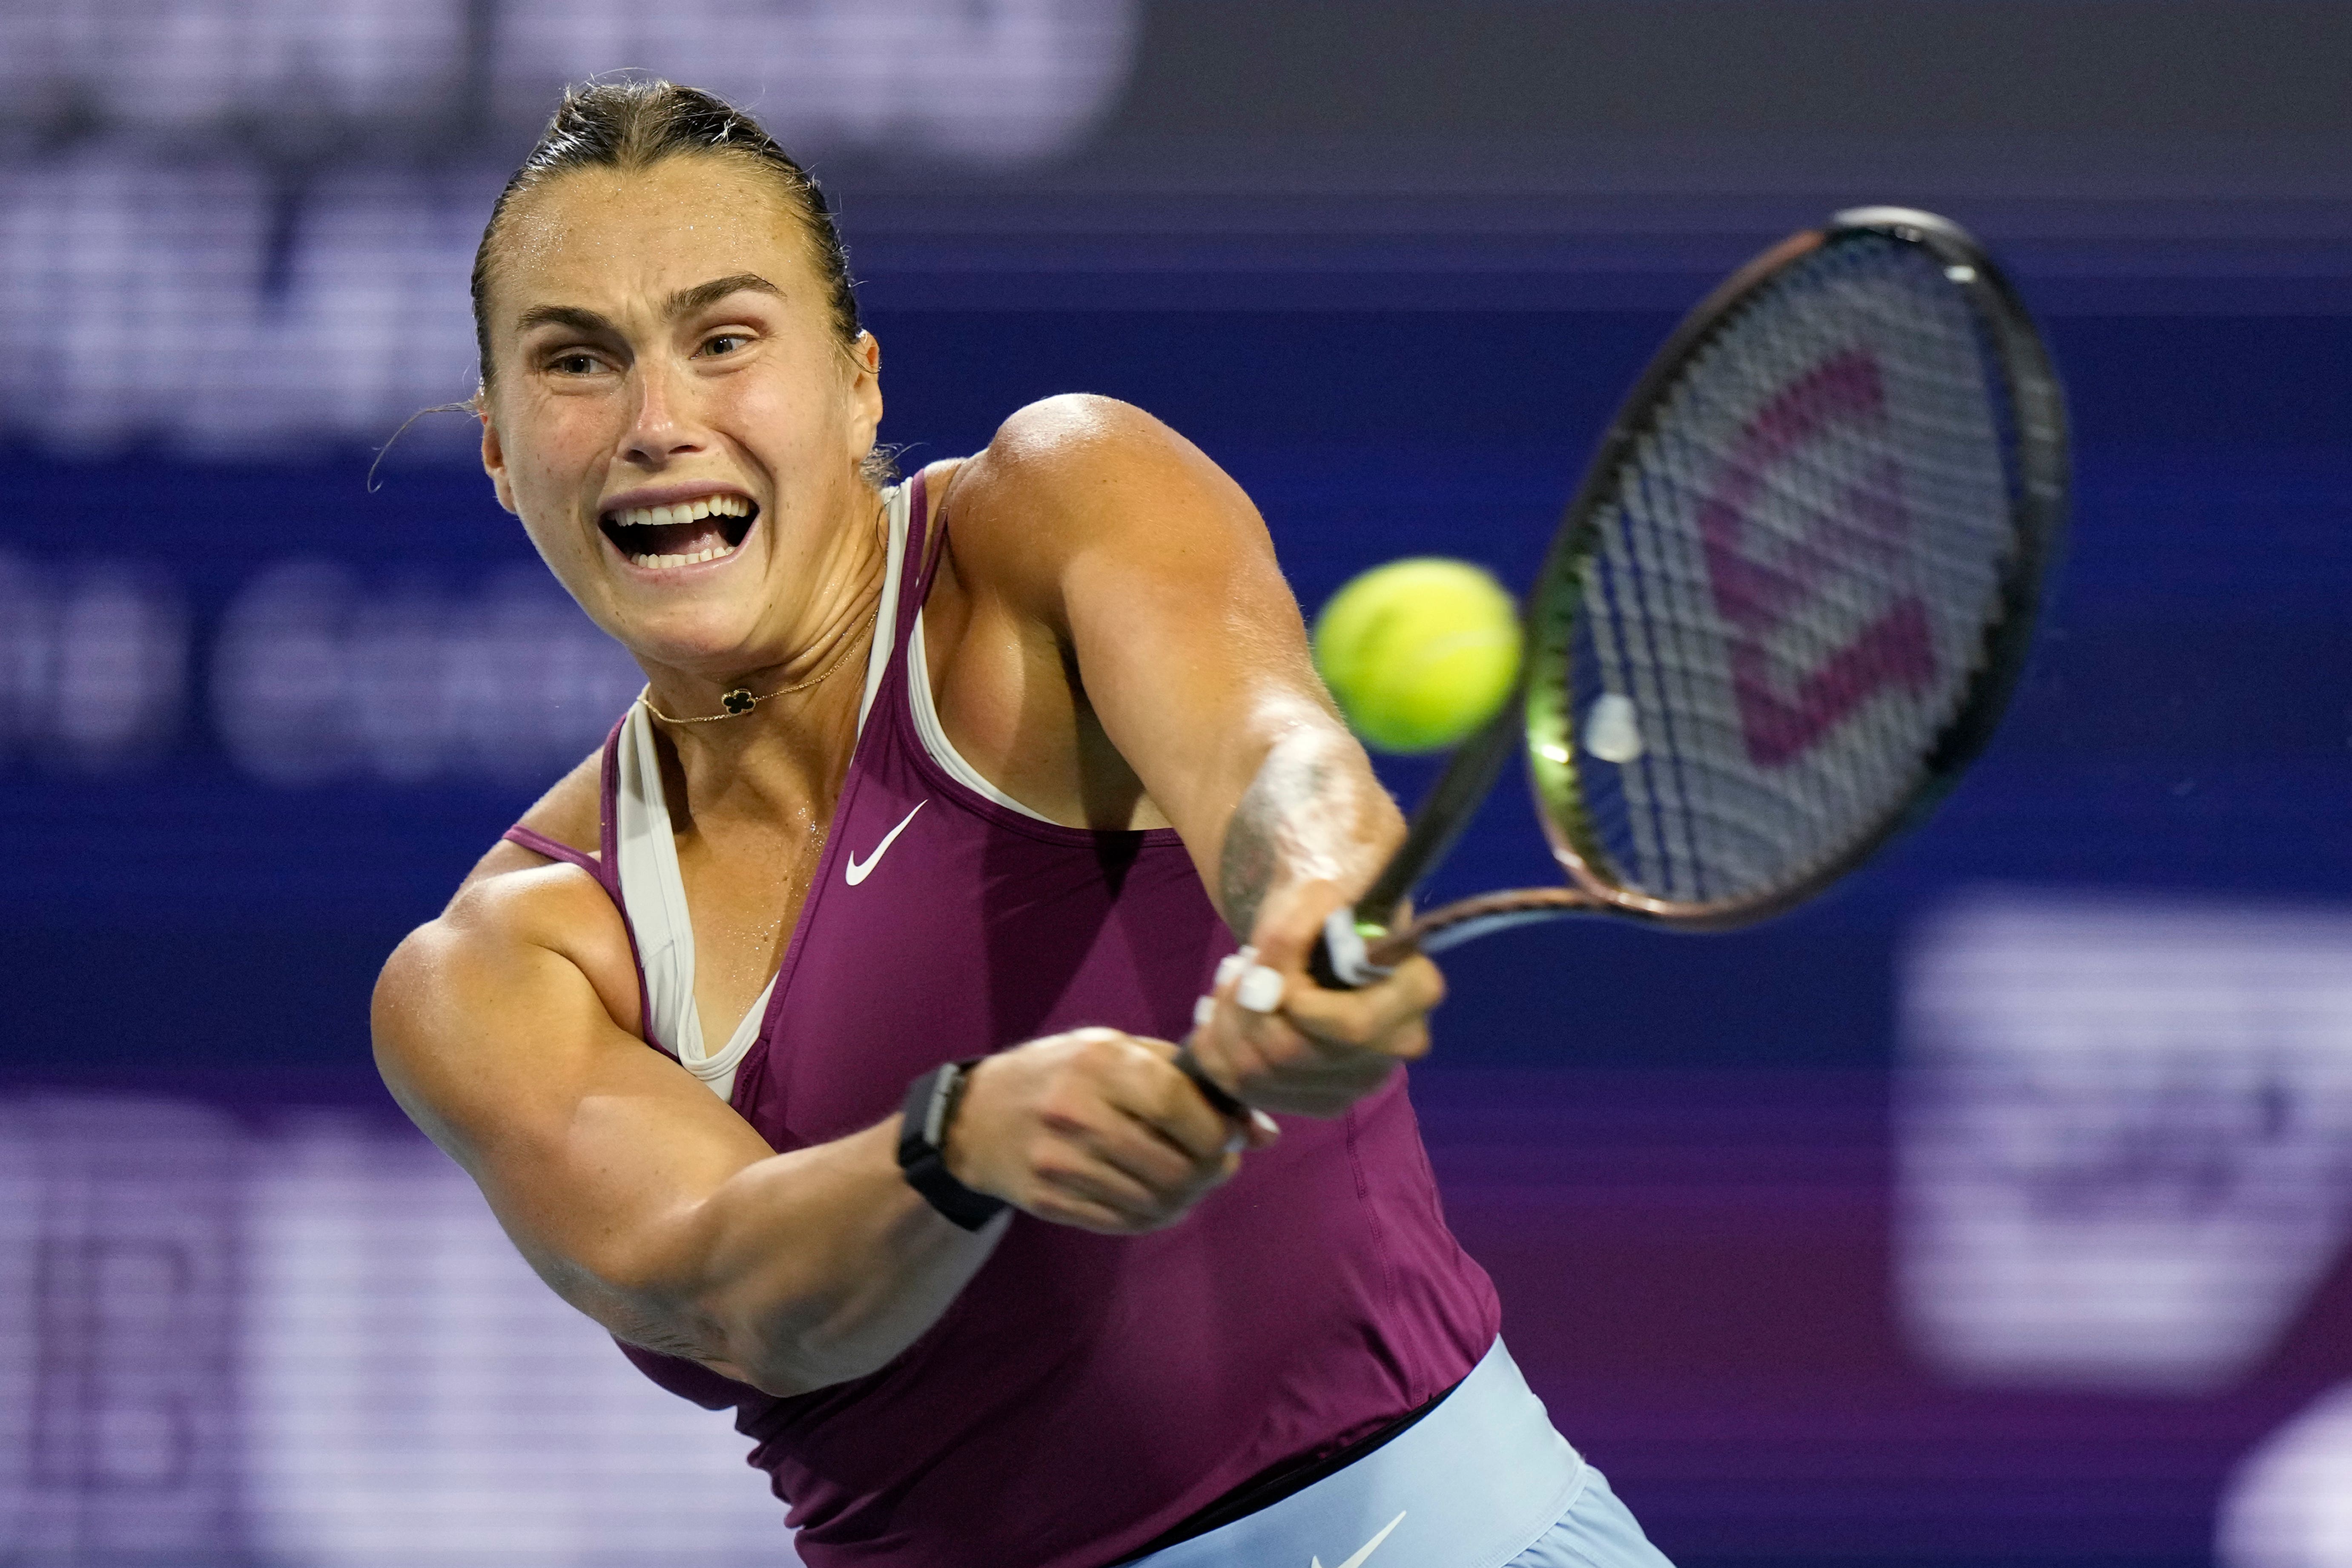 Aryna Sabalenka marches on in Miami with win over Marie Bouzkova The Independent